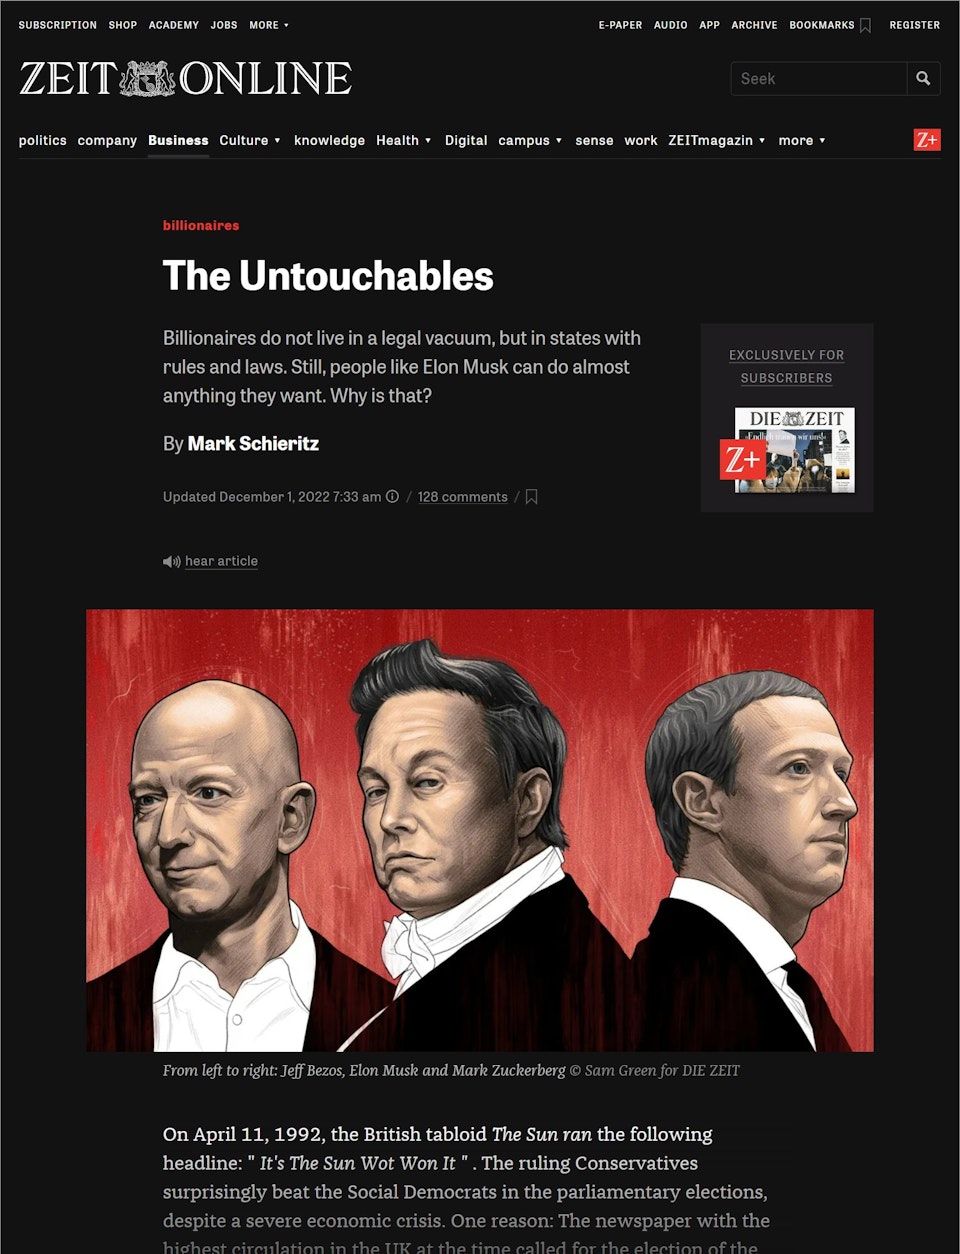 "The Untouchables" -  Die Zeit (The Times) Newspaper - Screenshot from the article.